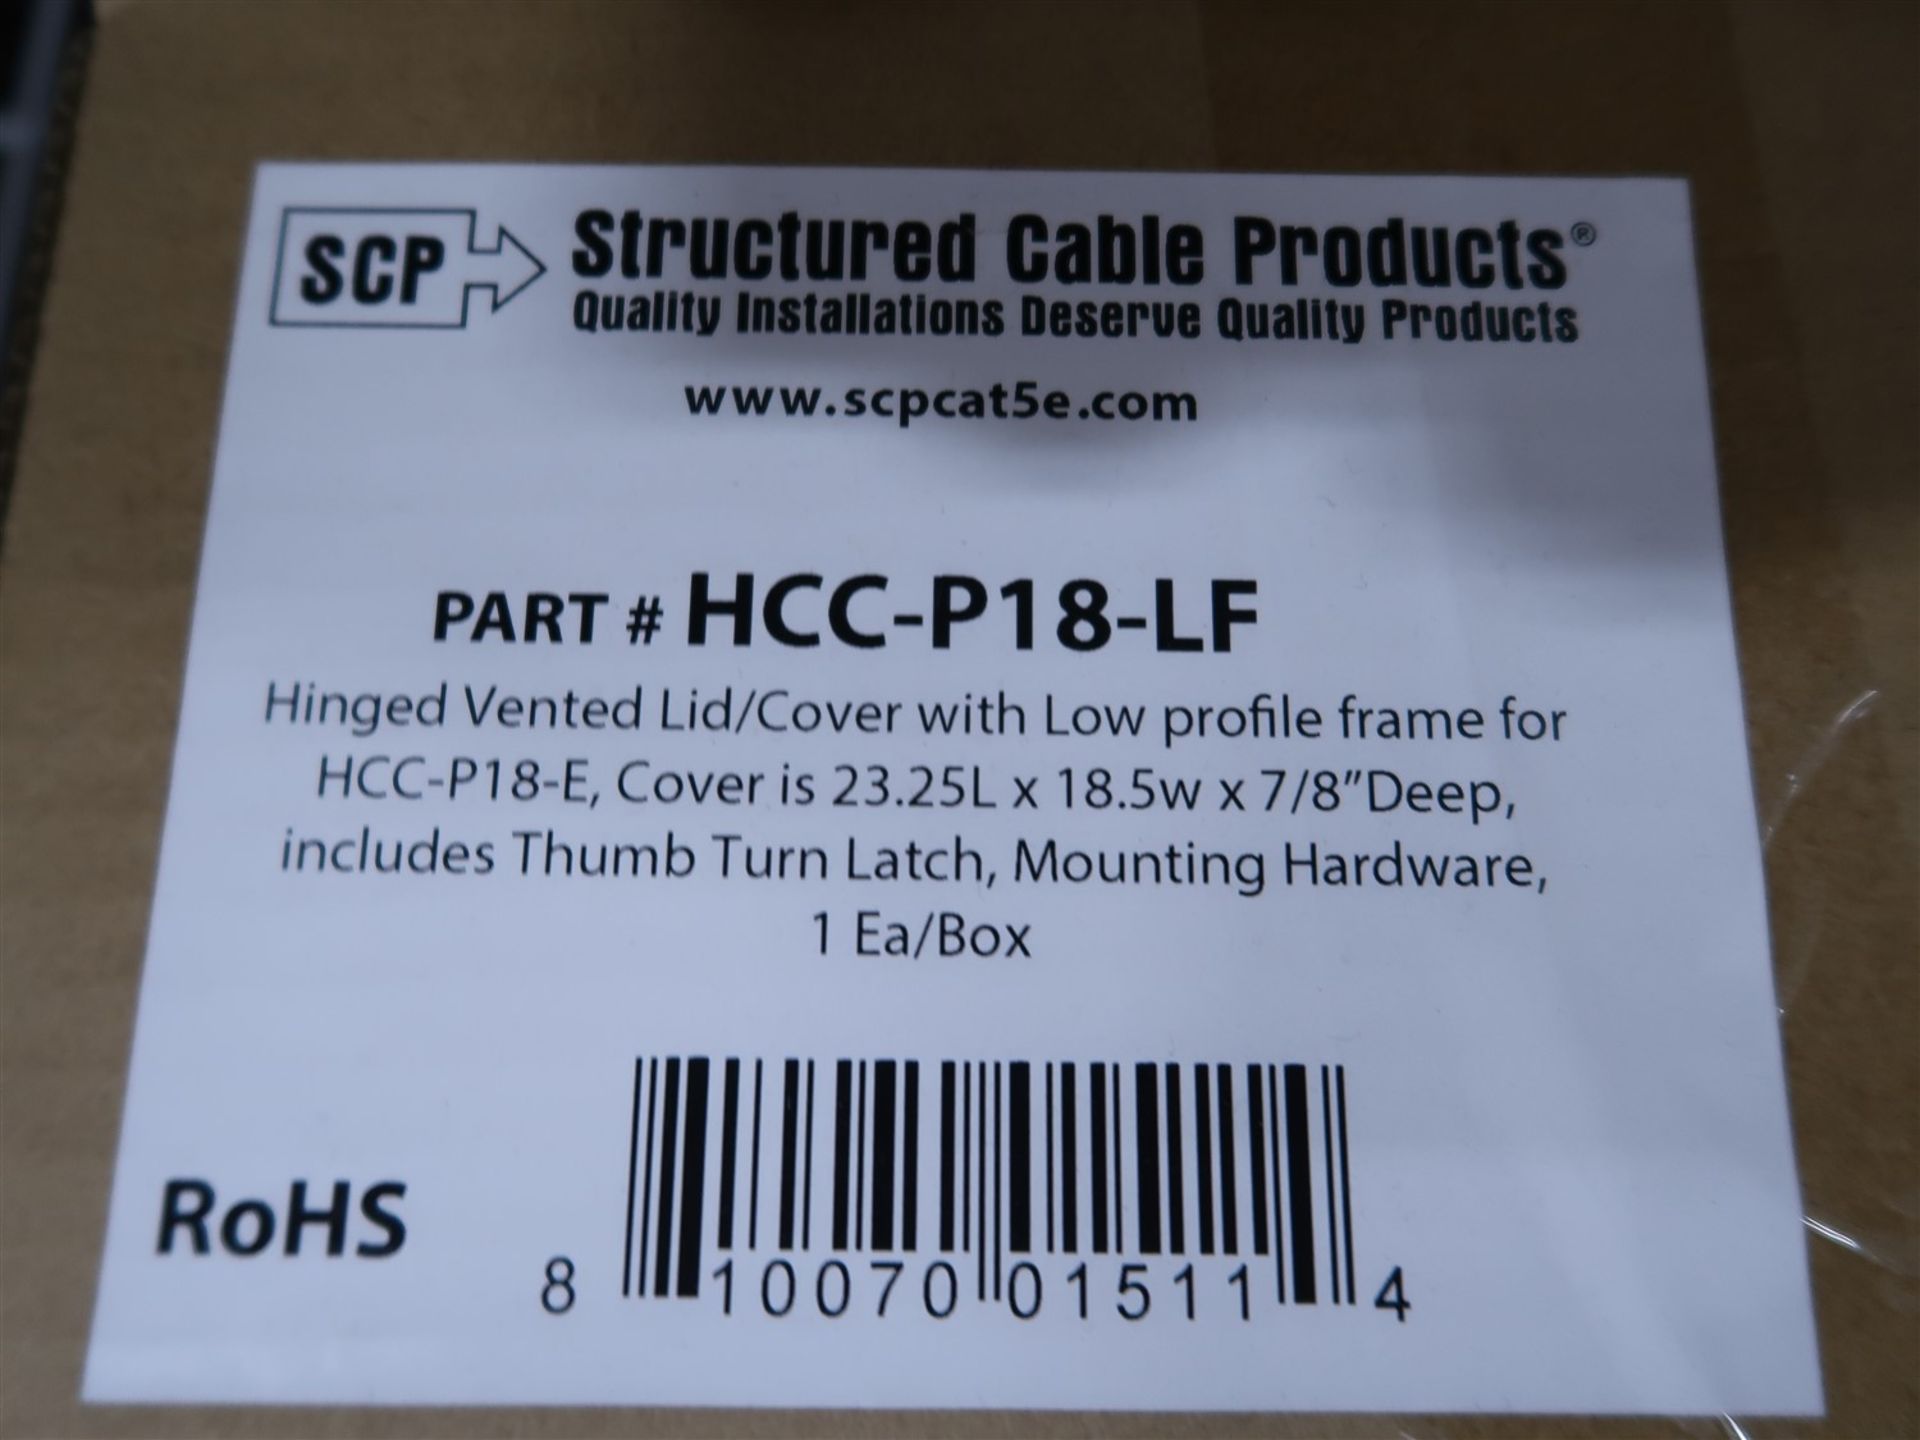 SCP HCC-P18-LF HINGED VENTED LID COVER FOR HCC-P18-E - Image 2 of 2